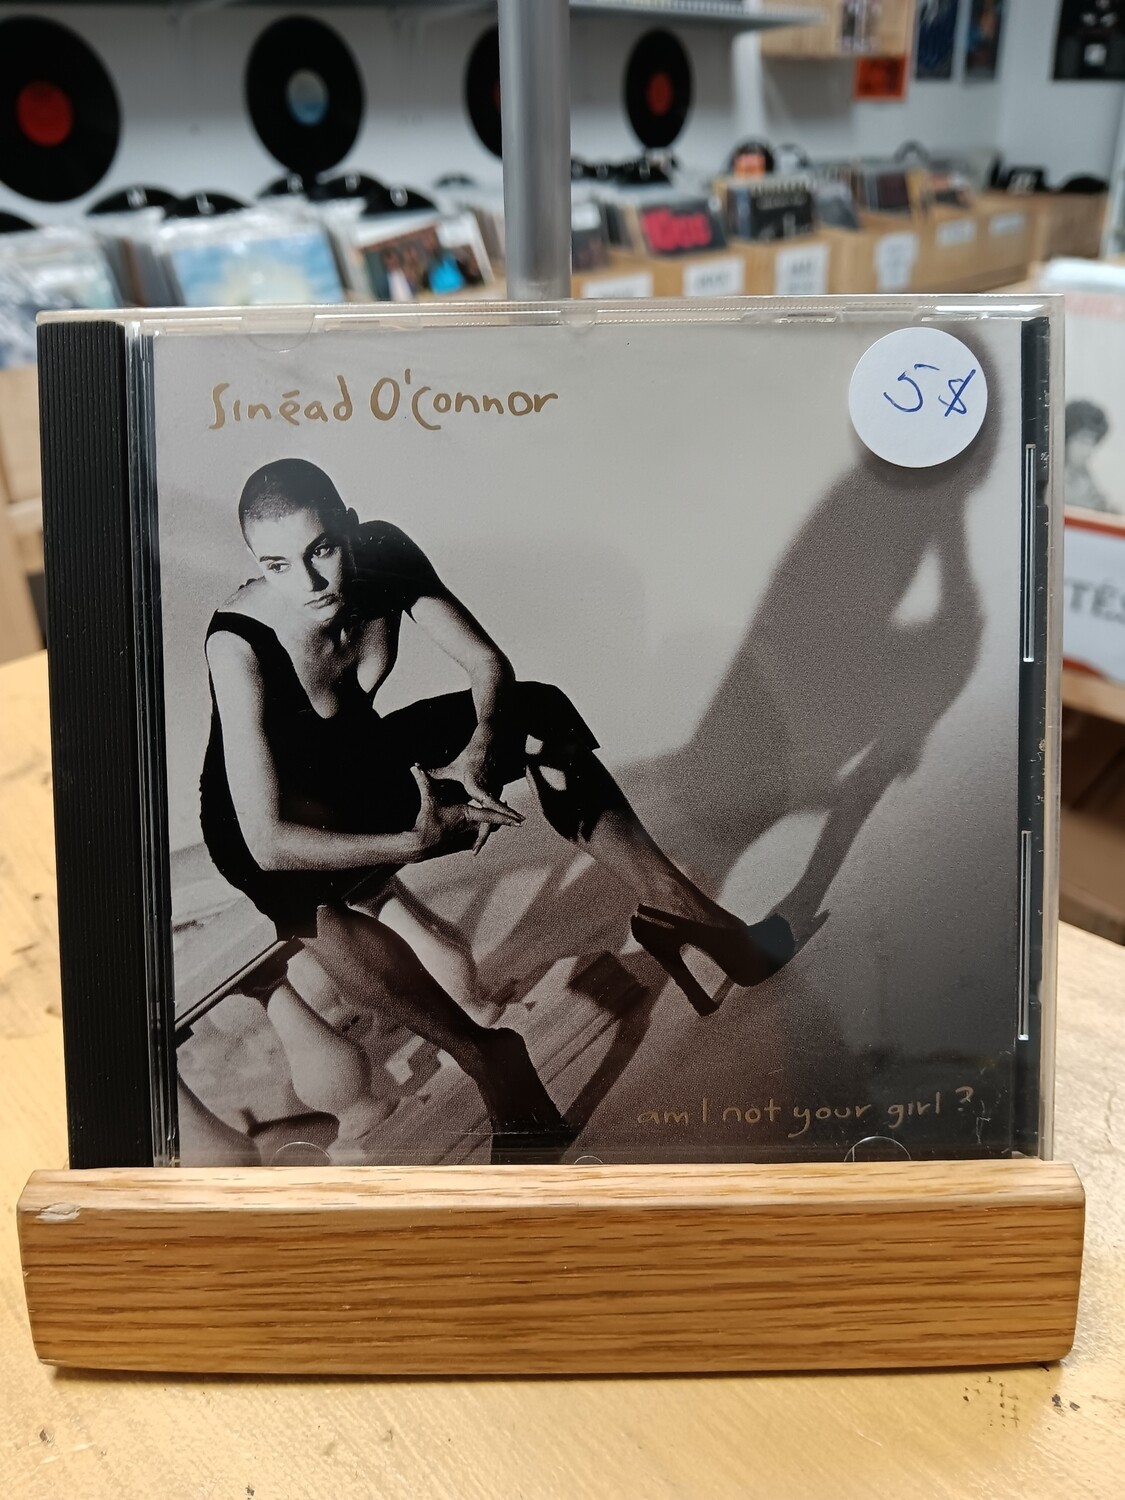 Sinead O'Connor - Am I not your girl (CD)